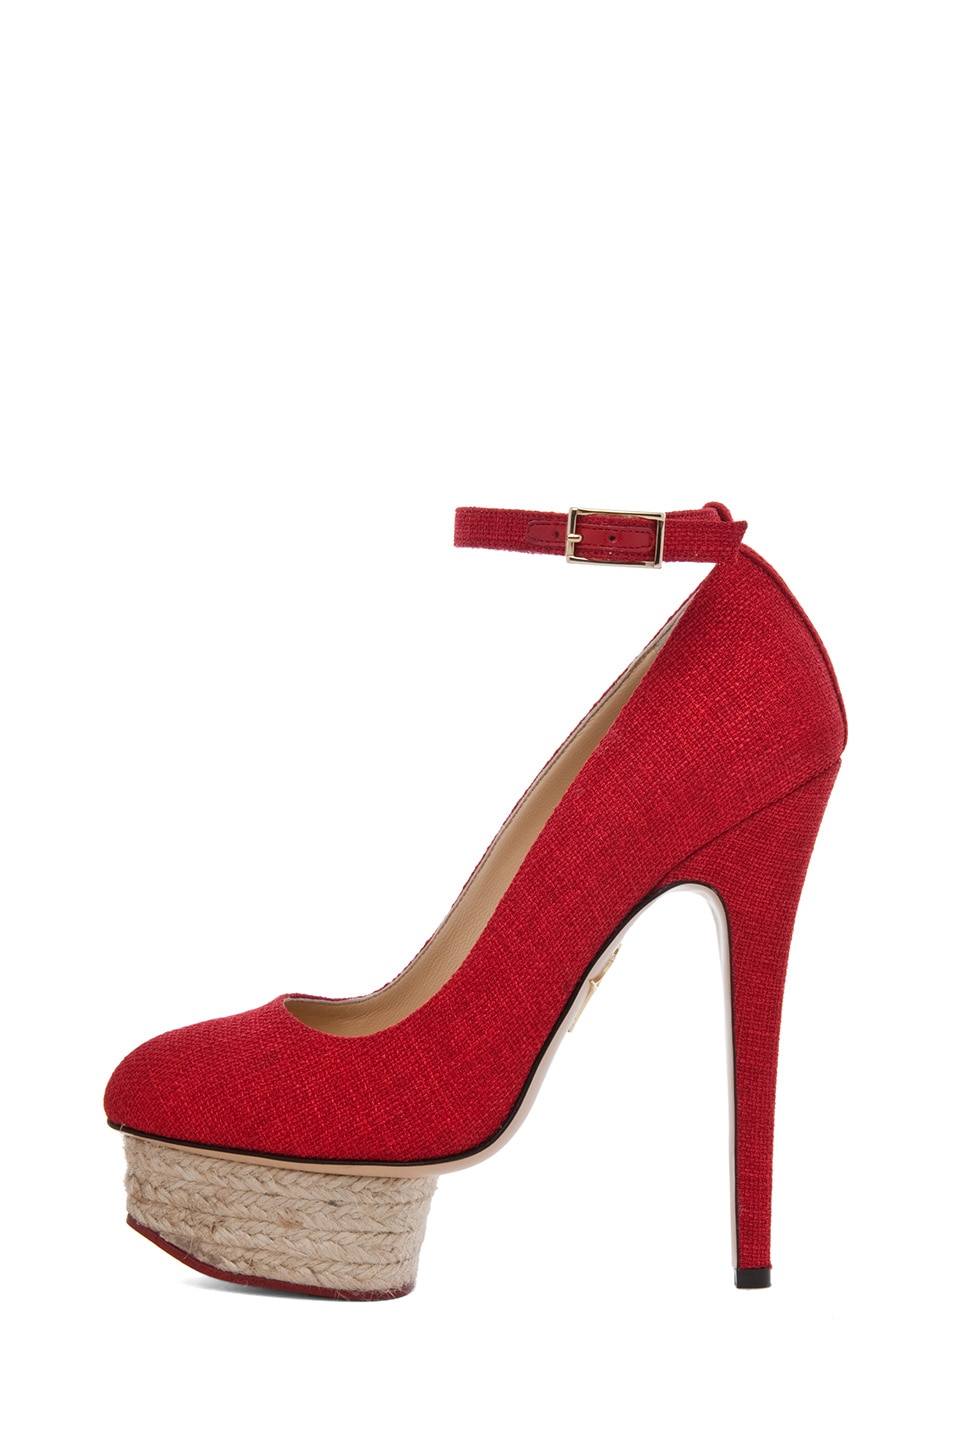 Image 1 of Charlotte Olympia Dolores Espadrille Heel in Red